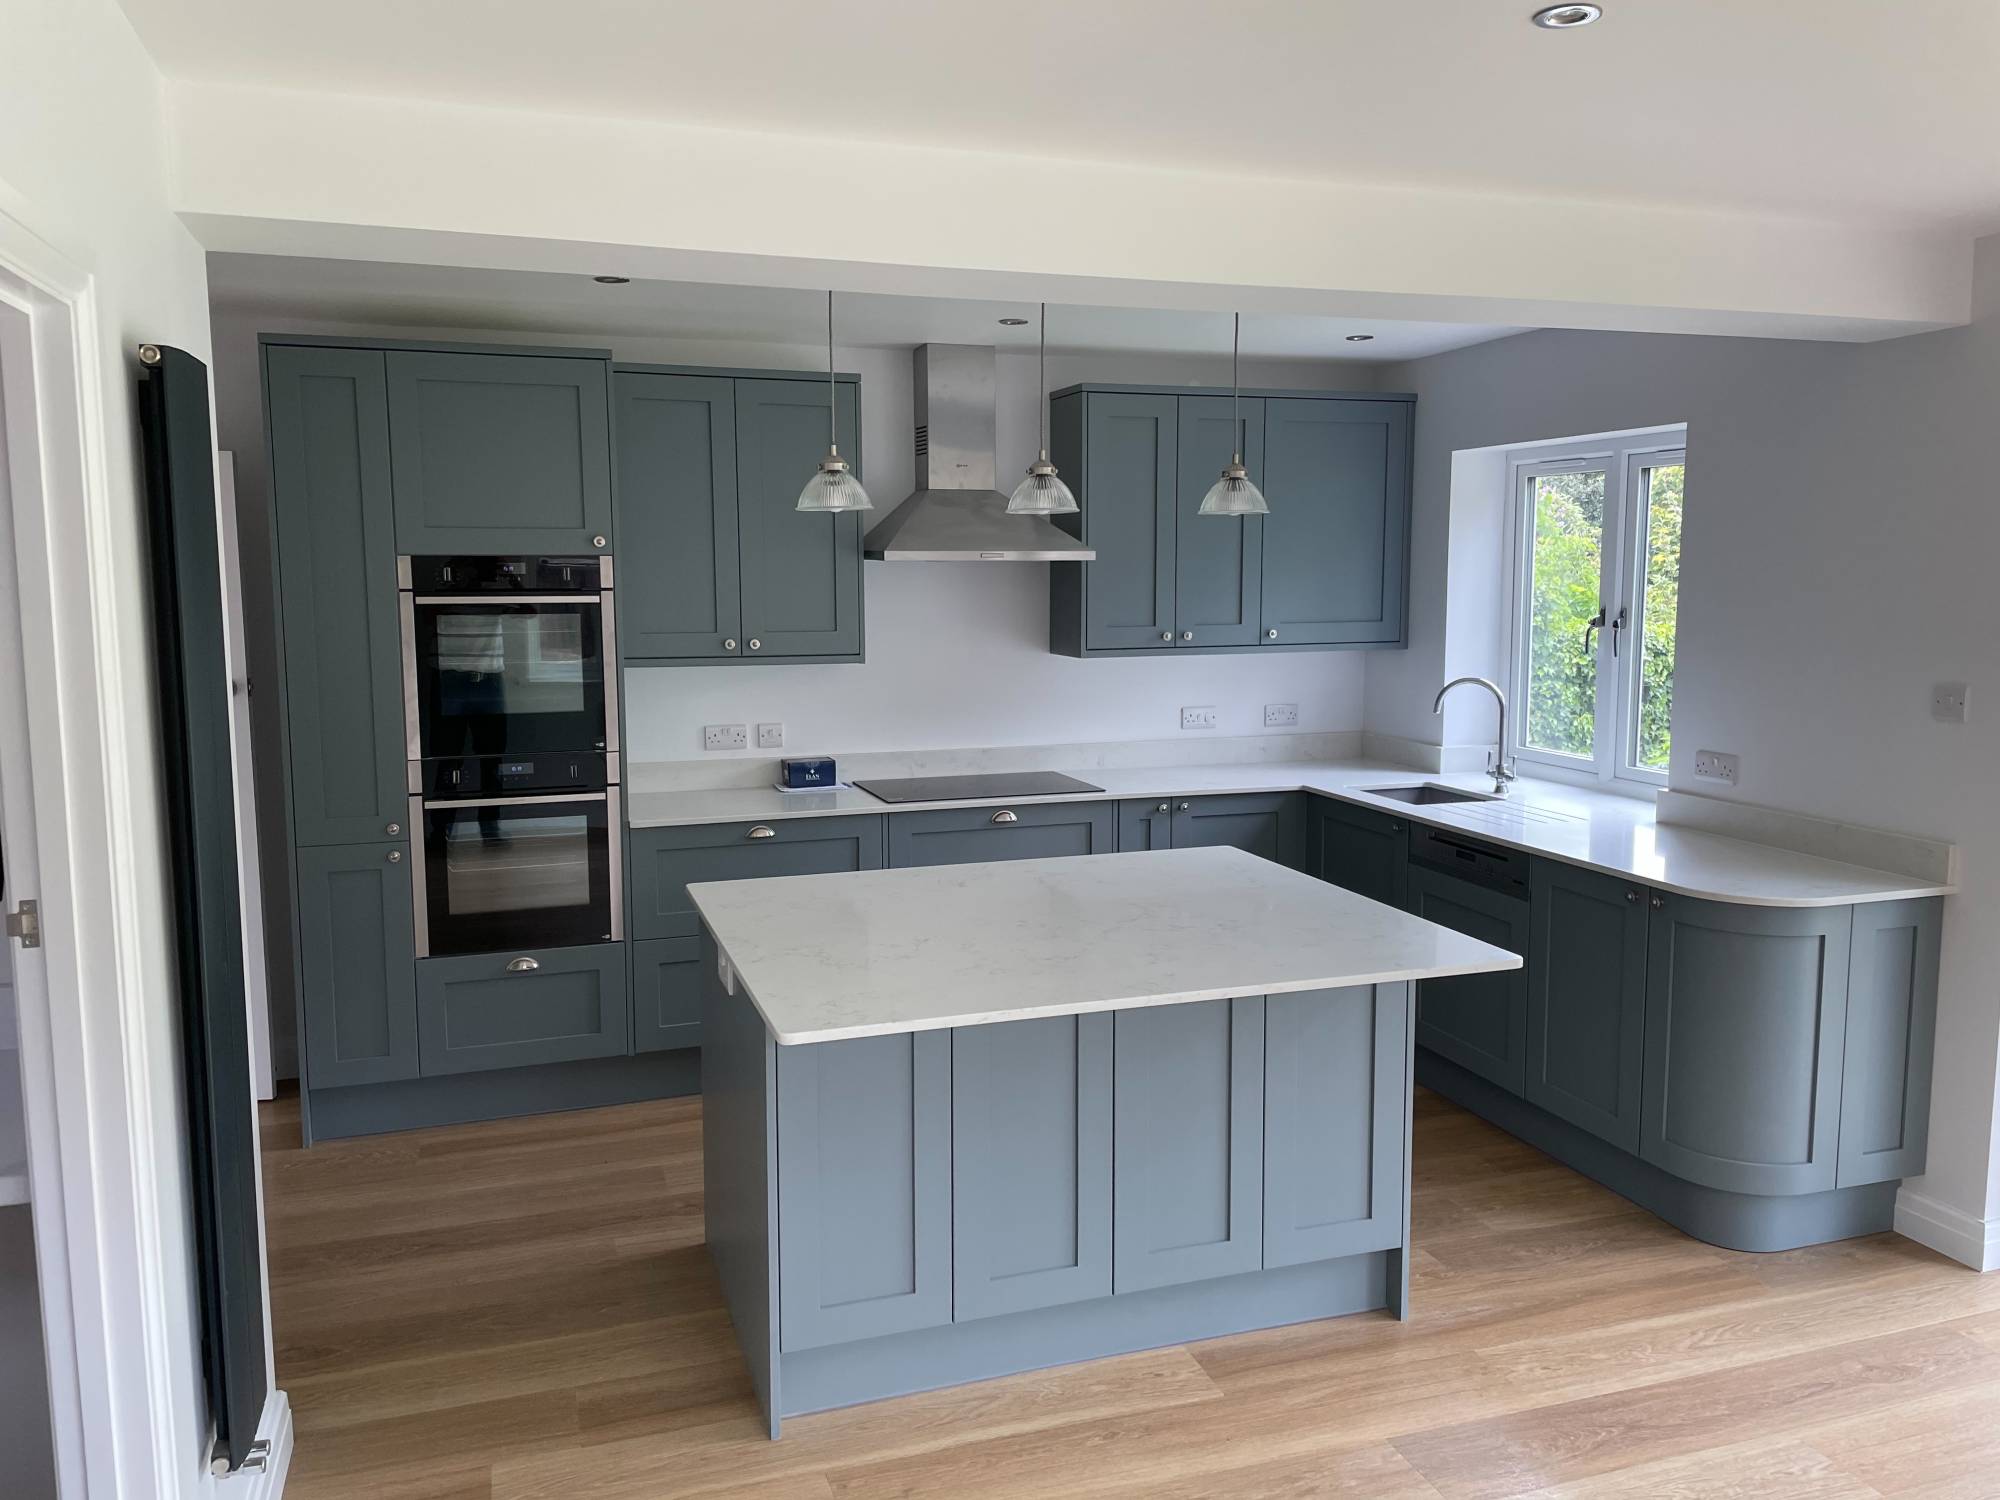 A new kitchen in a house extension